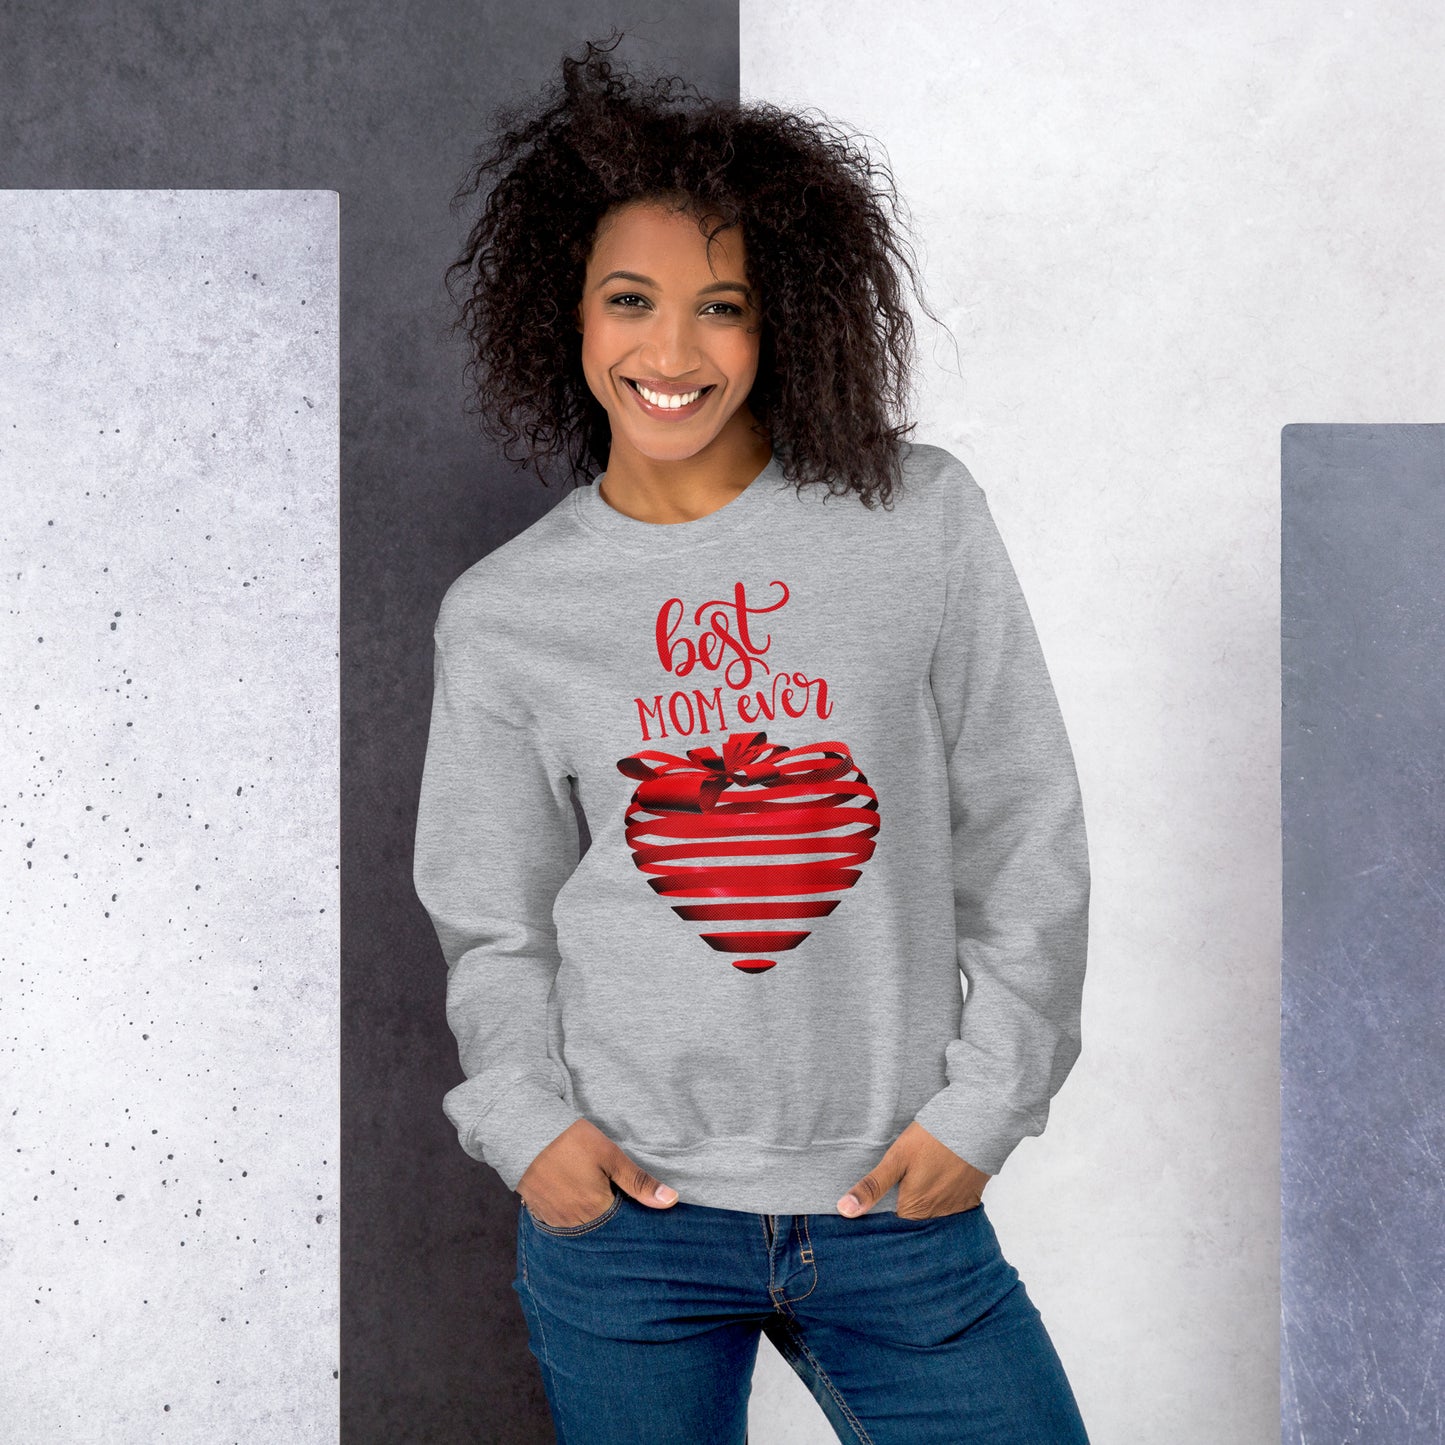 Women with sport grey sweater with red text best MOM Ever and red heart